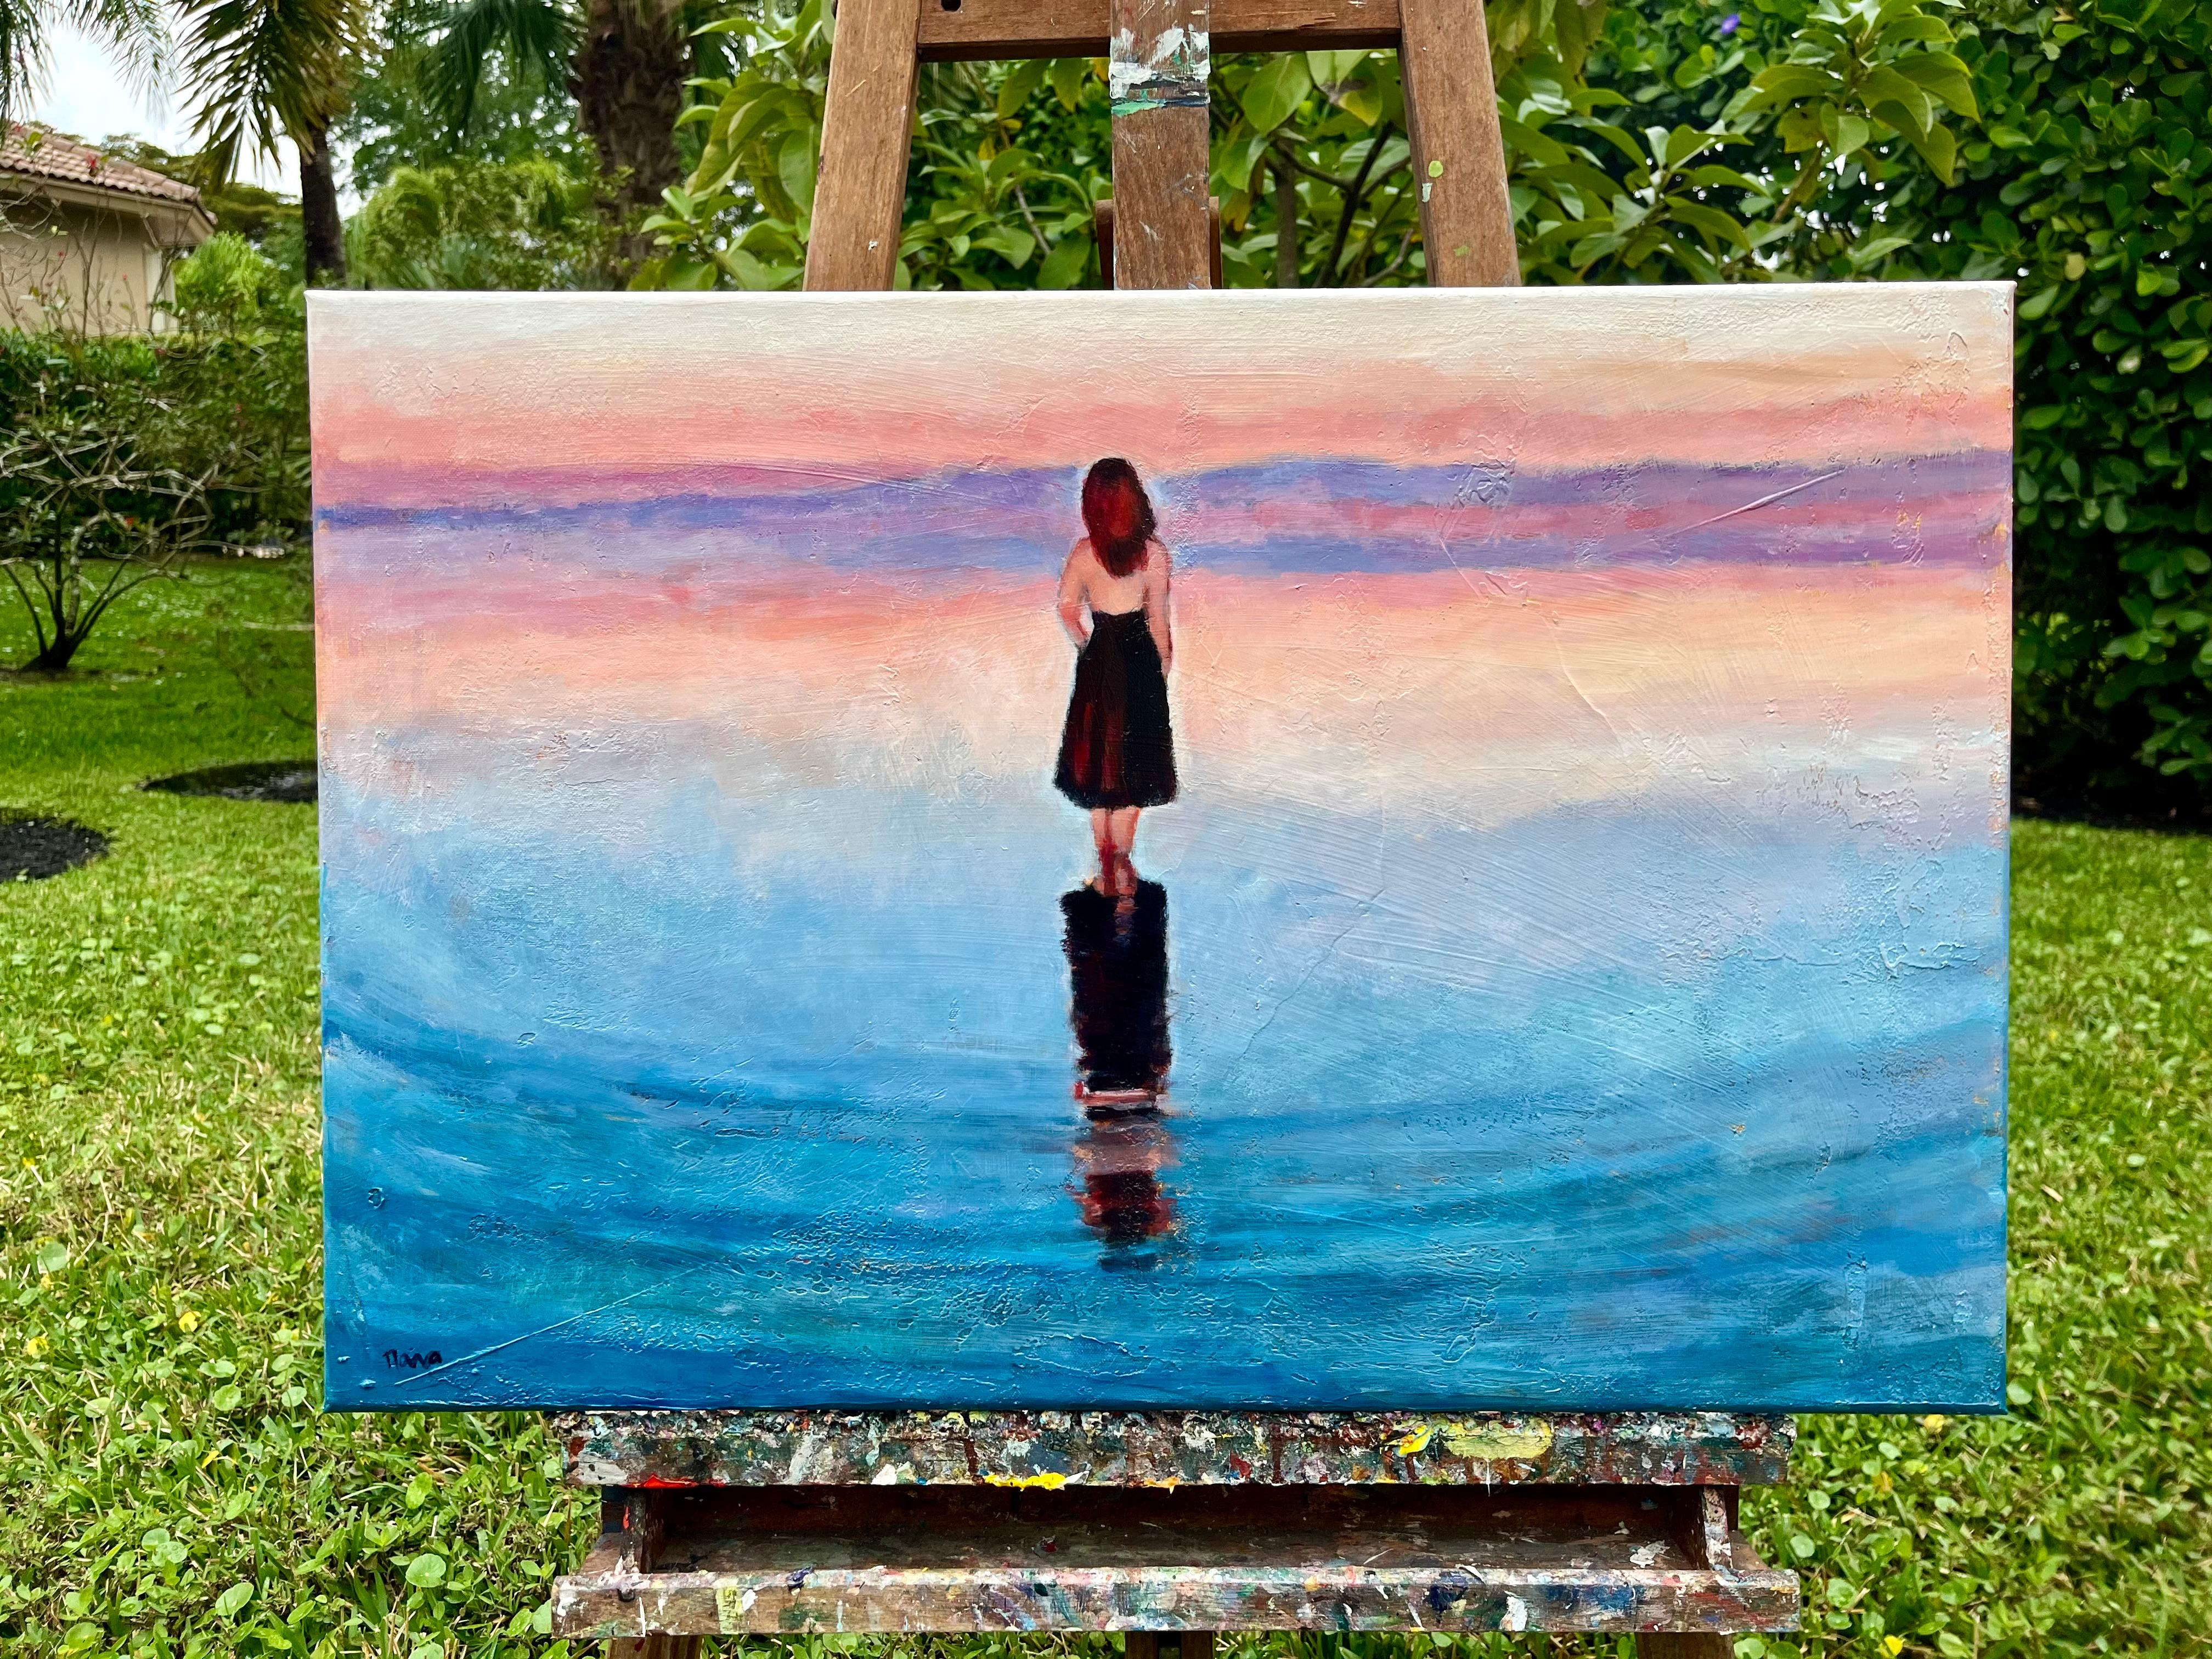 <p>Artist Comments<br>A woman stands in the shallow water, sensing the expansive world around her. The pink and purple sky blends with the sea, creating an image of endless space. The composition invites contemplation and exudes a serene sense of